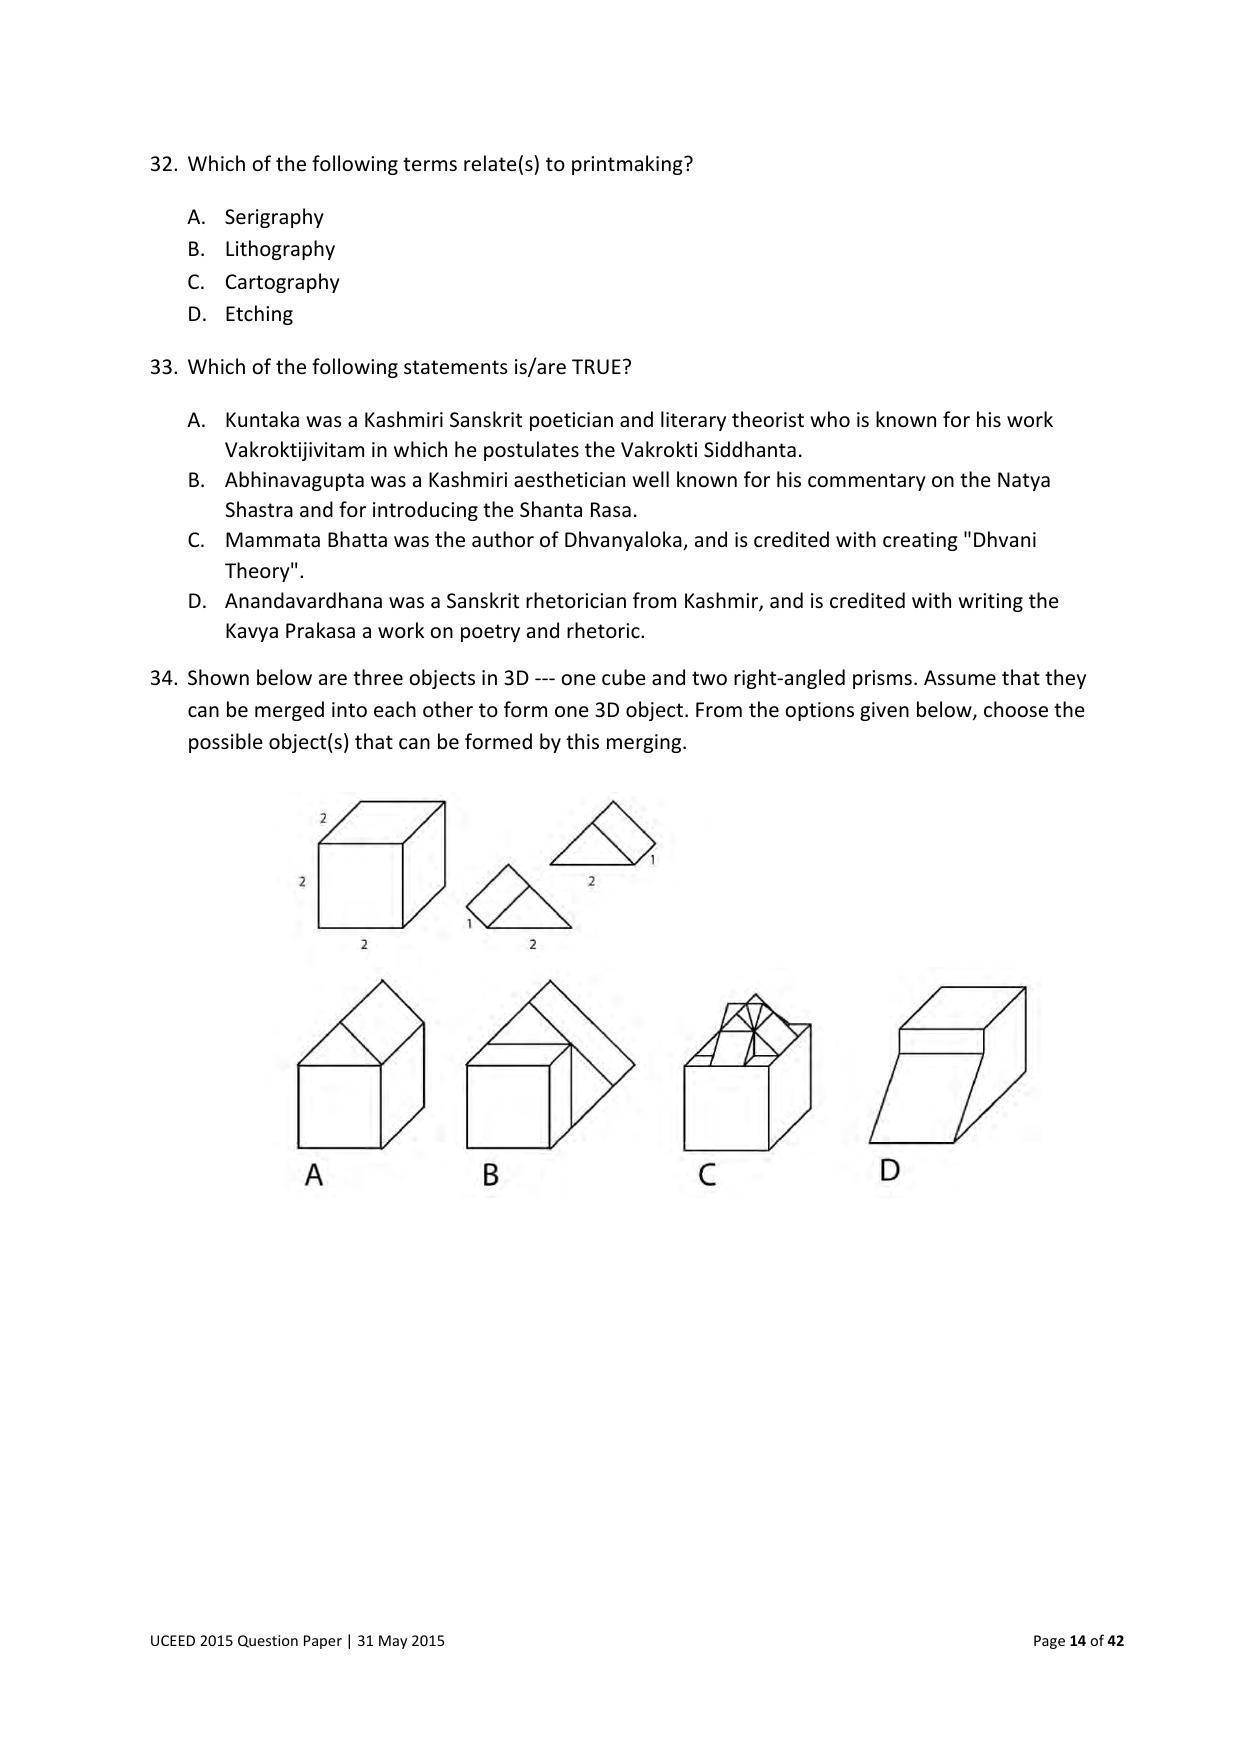 UCEED 2015 Question Paper - Page 14